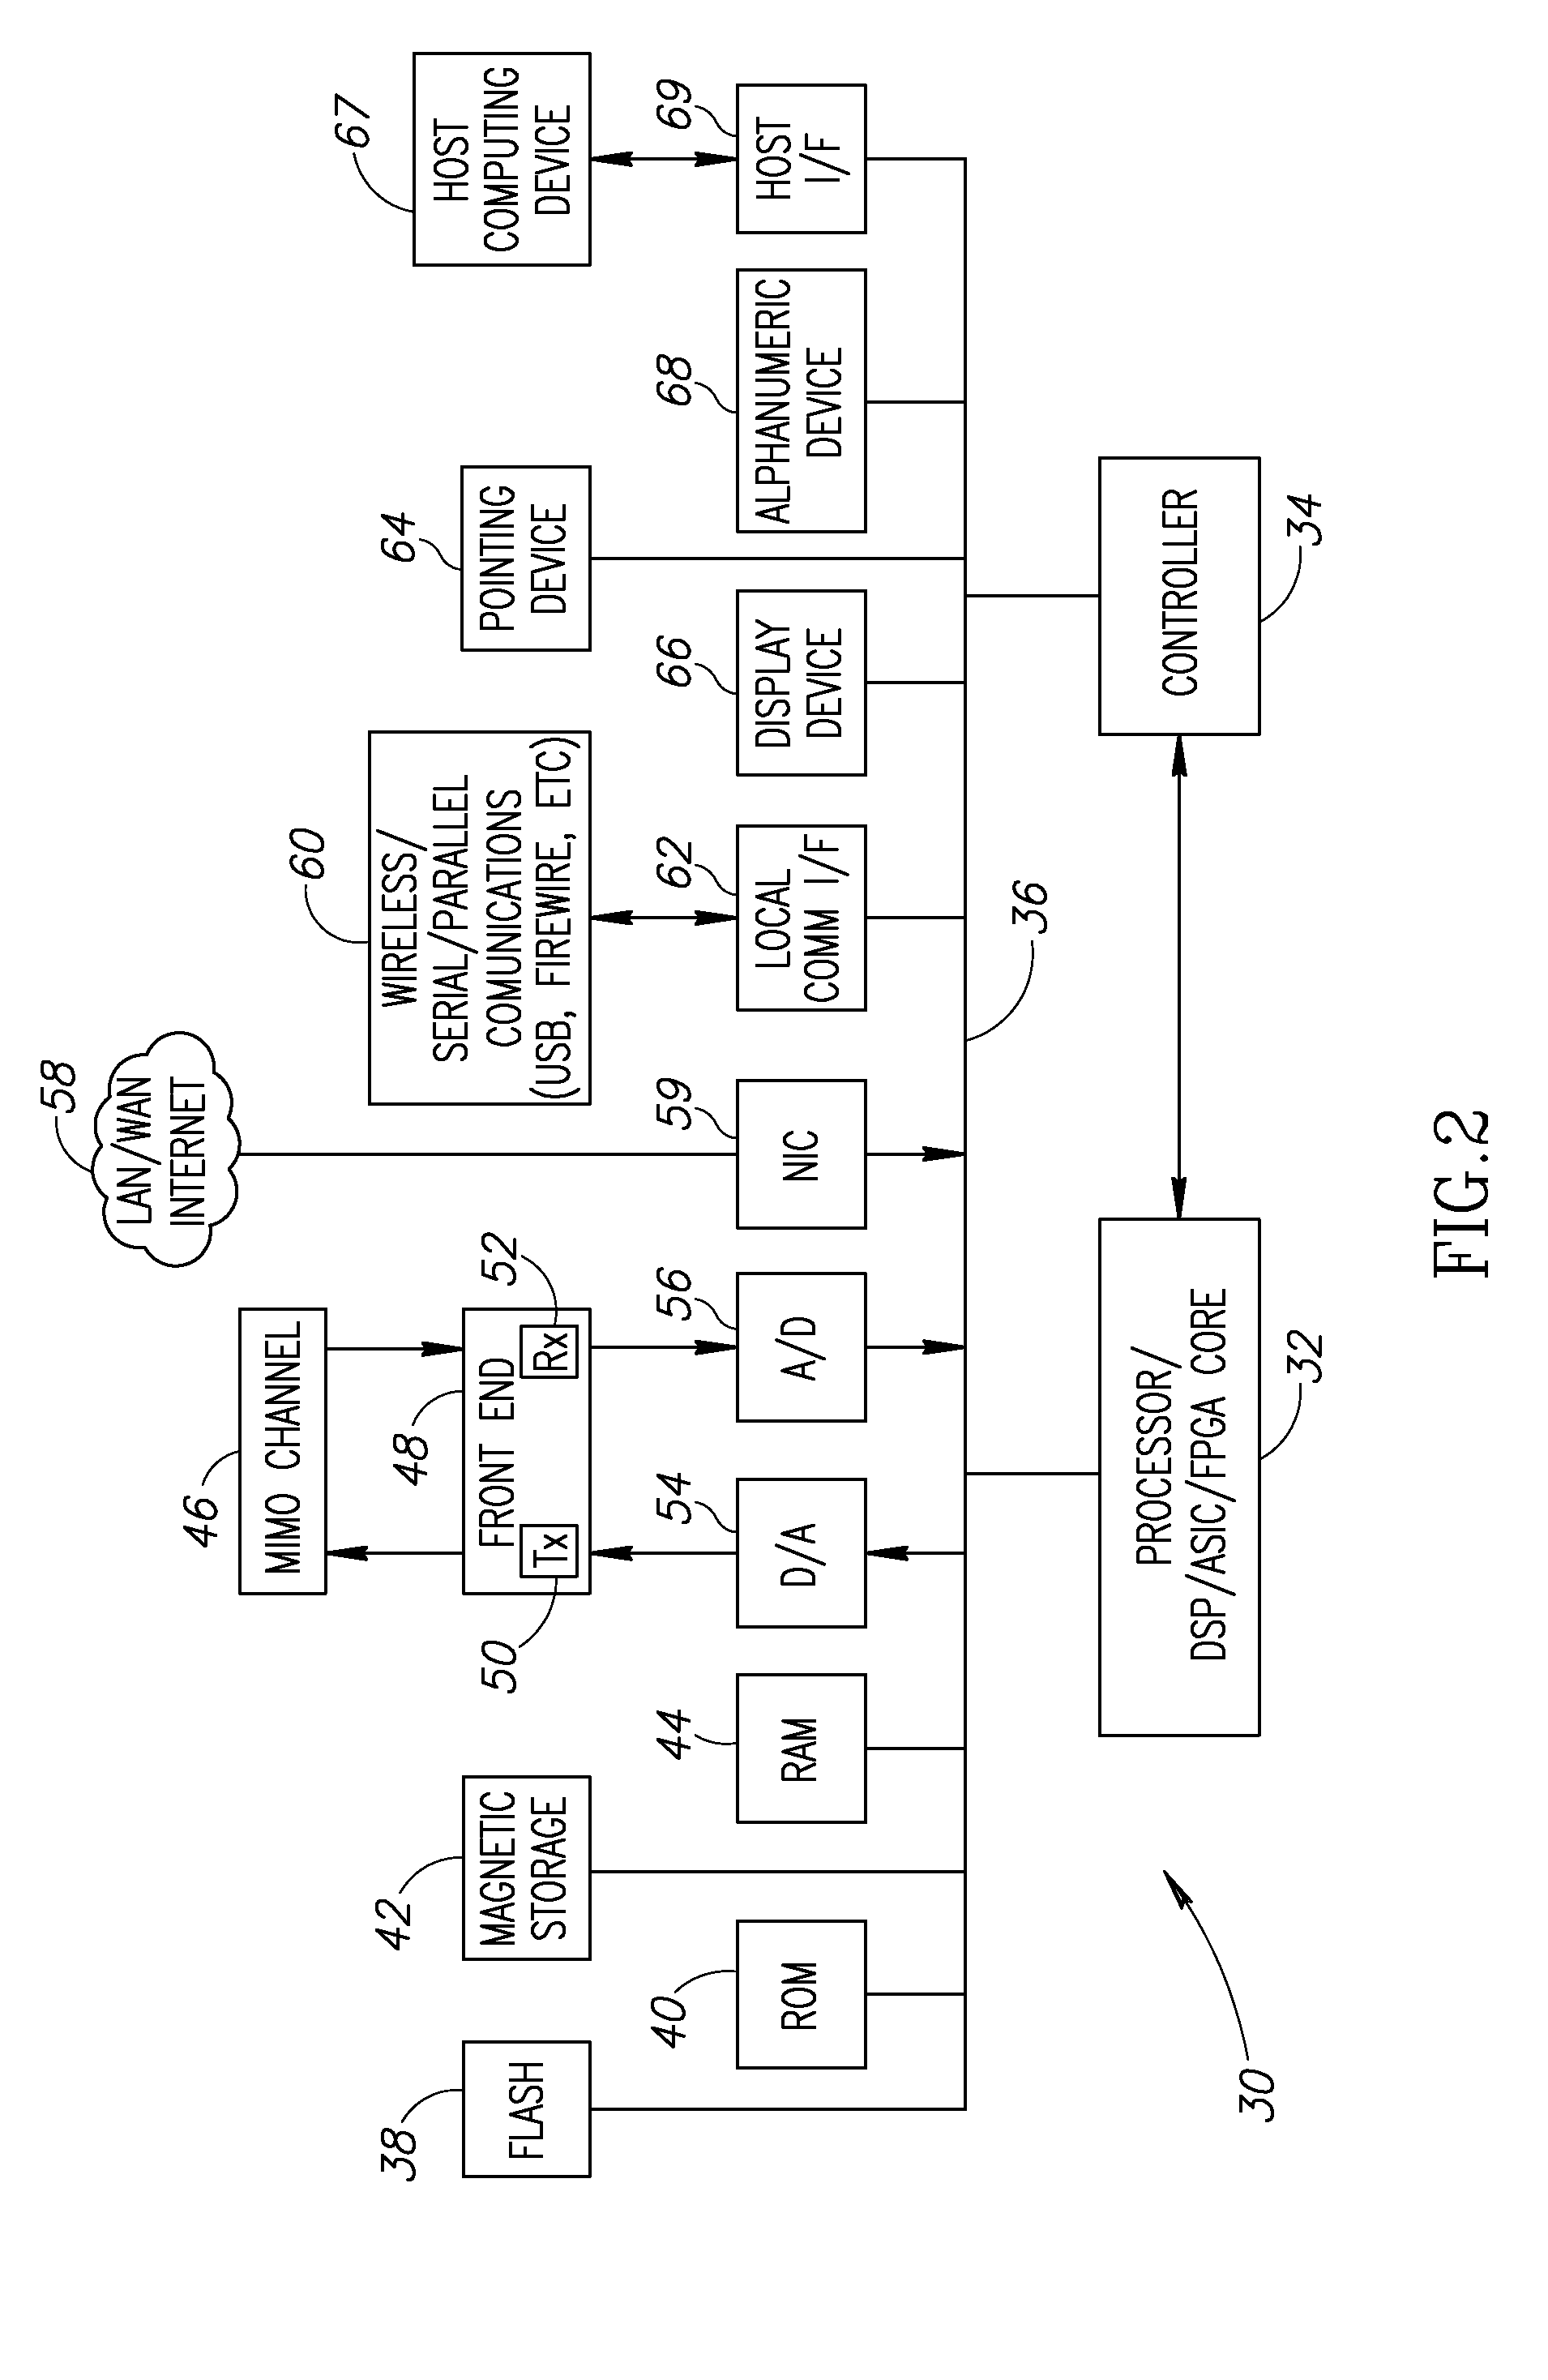 Multiple-input multiple-output (MIMO) detector incorporating efficient signal point search